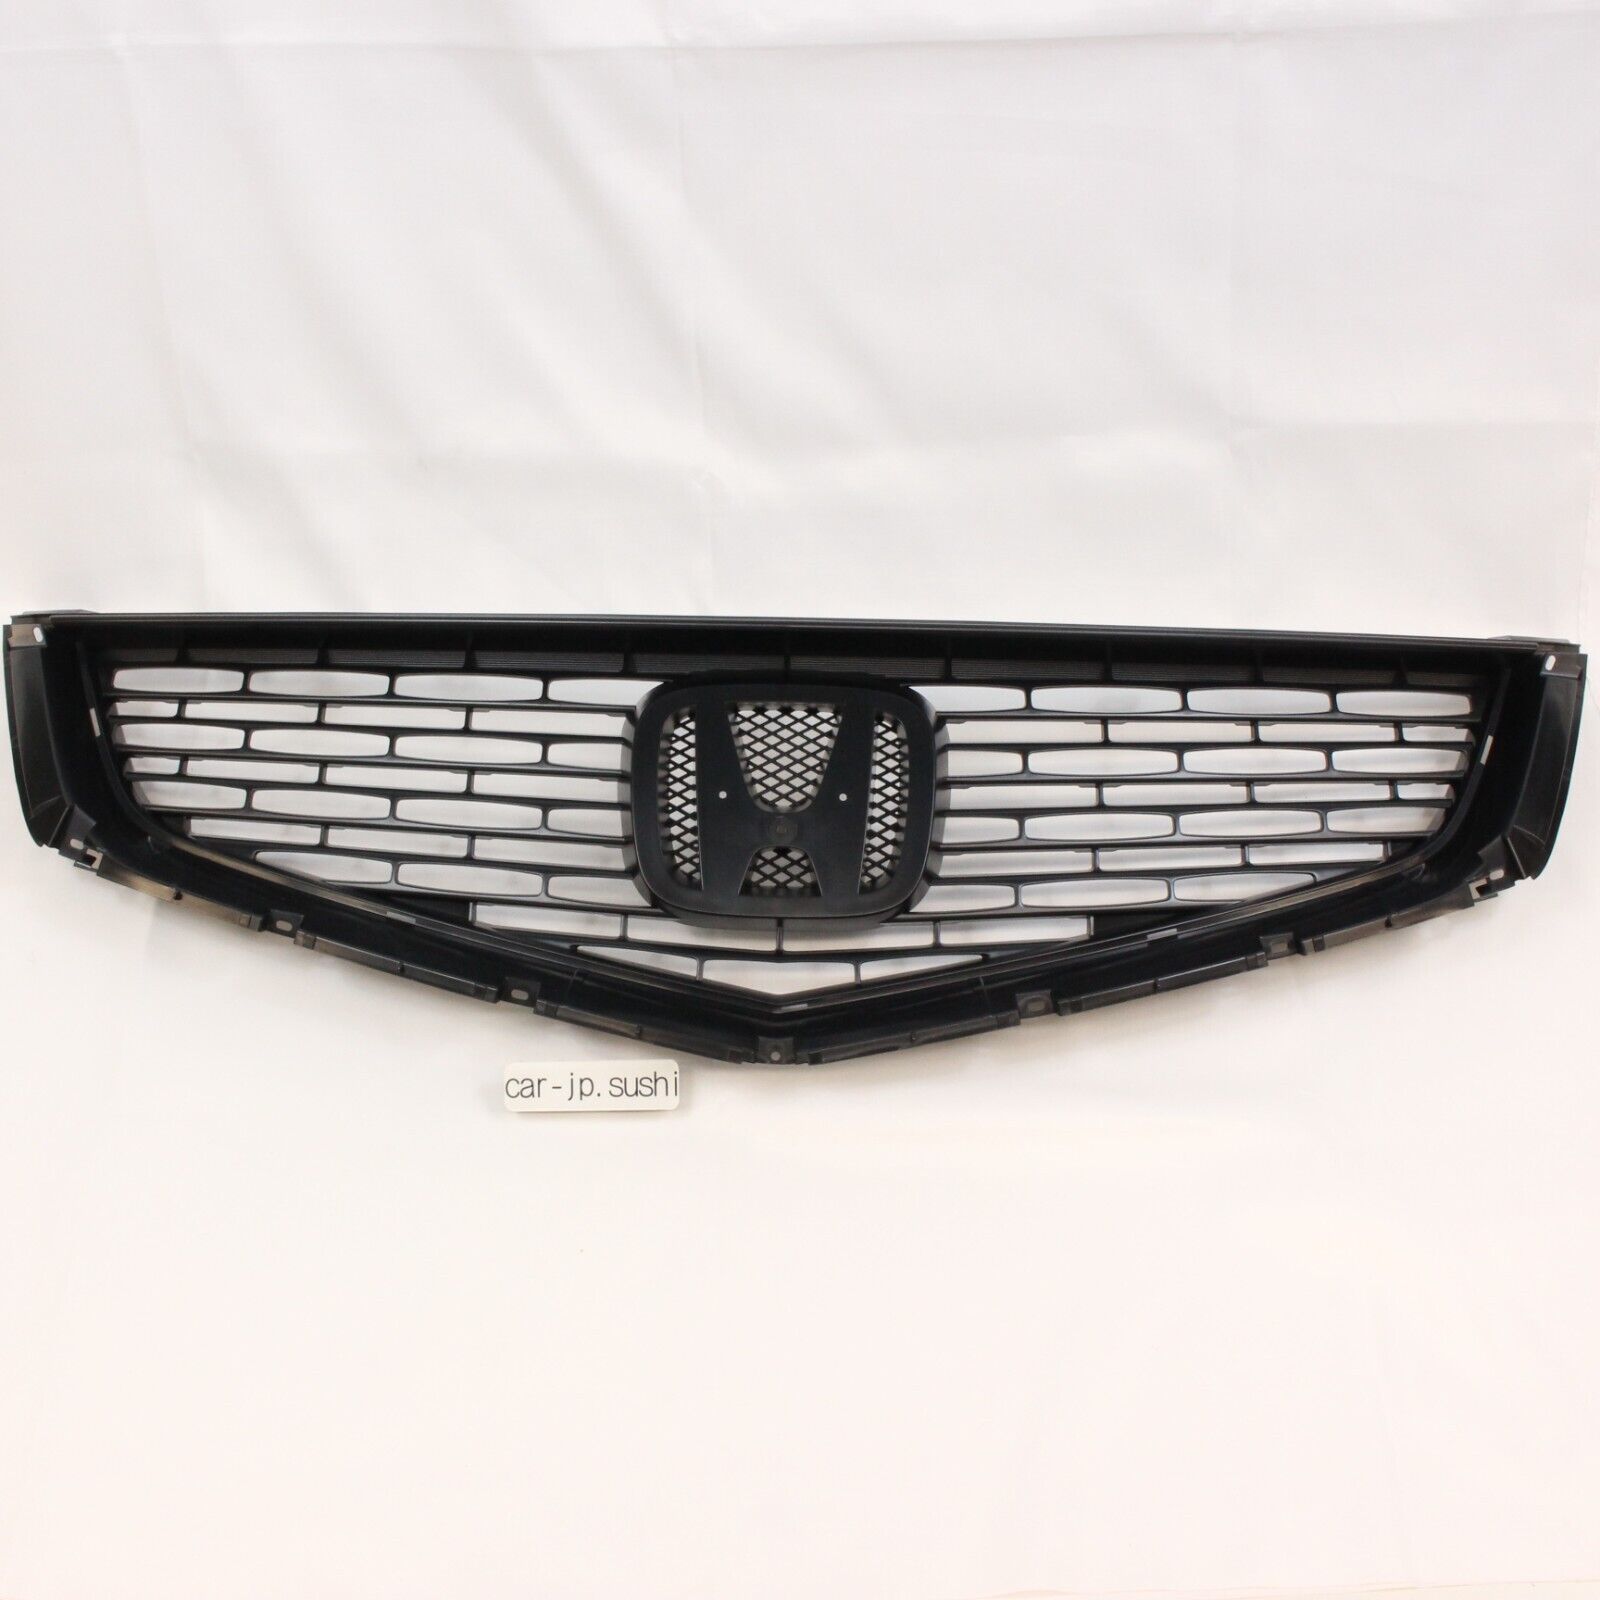 HONDA Genuine Accord TSX CL7 CL9 CM Euro R Front Grille Base 71121-SEA-902 OEM